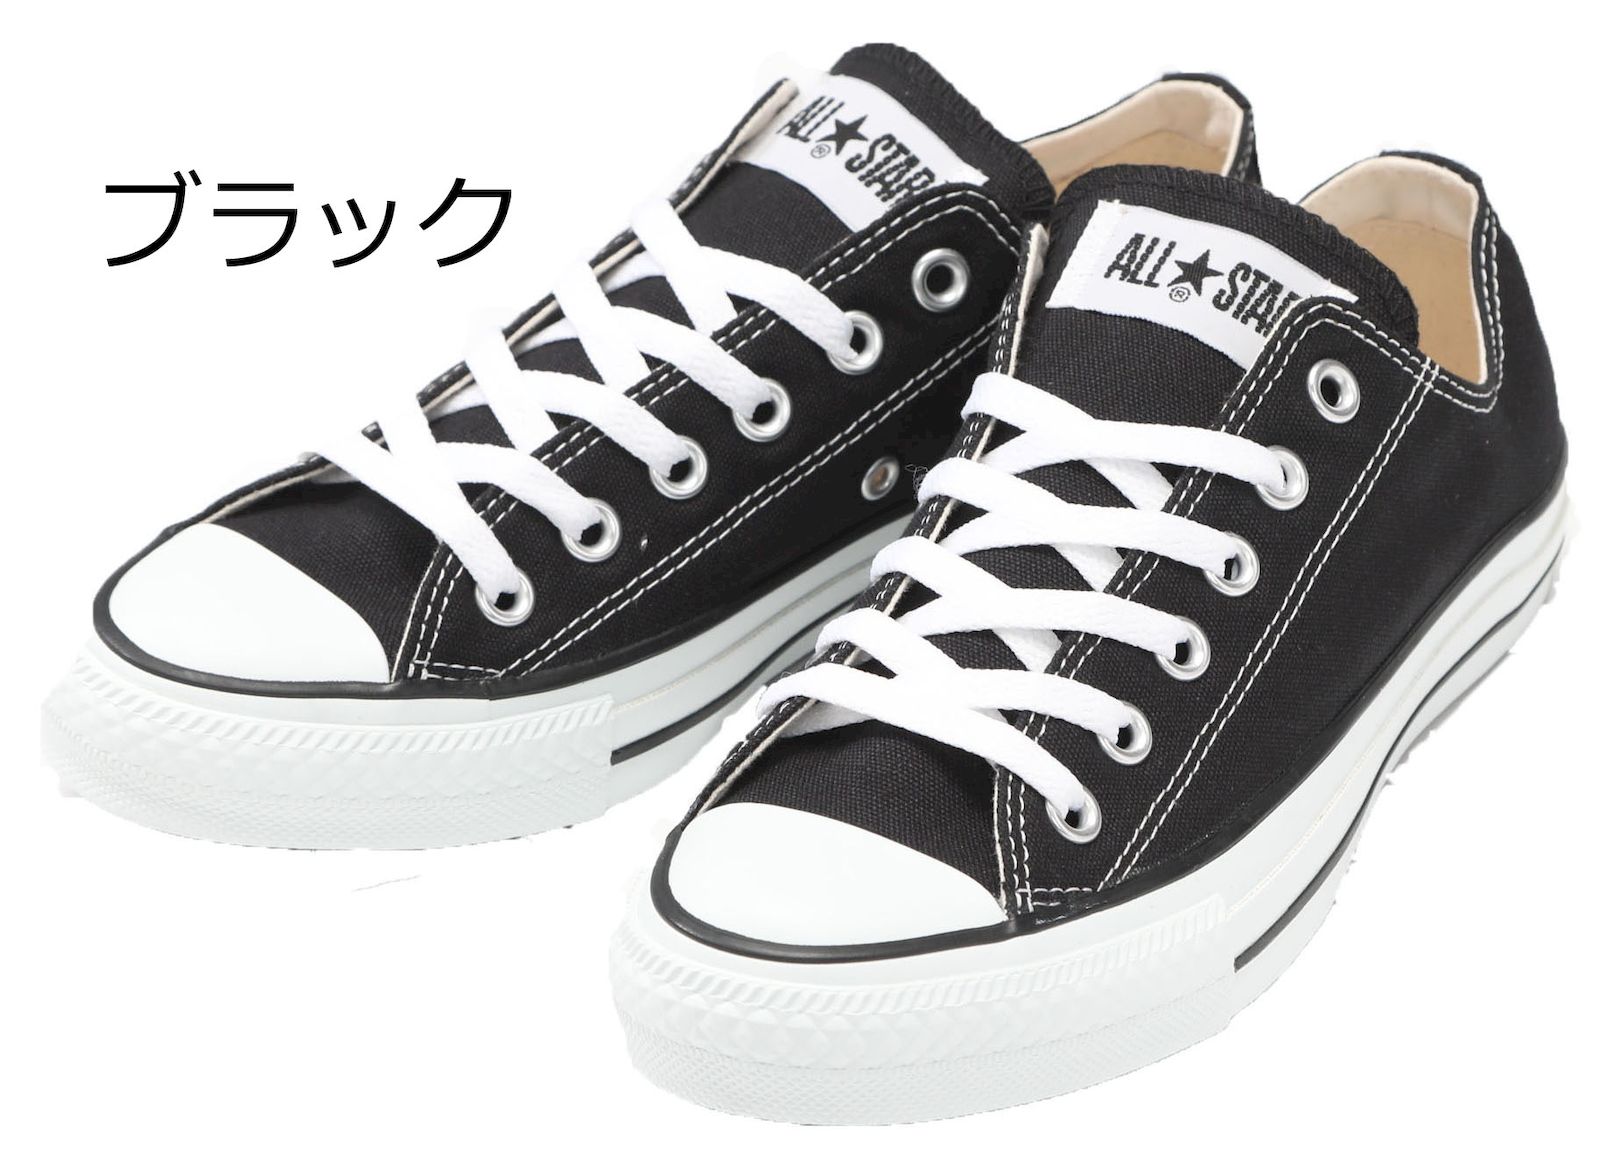 converse all star sneakers for unisex